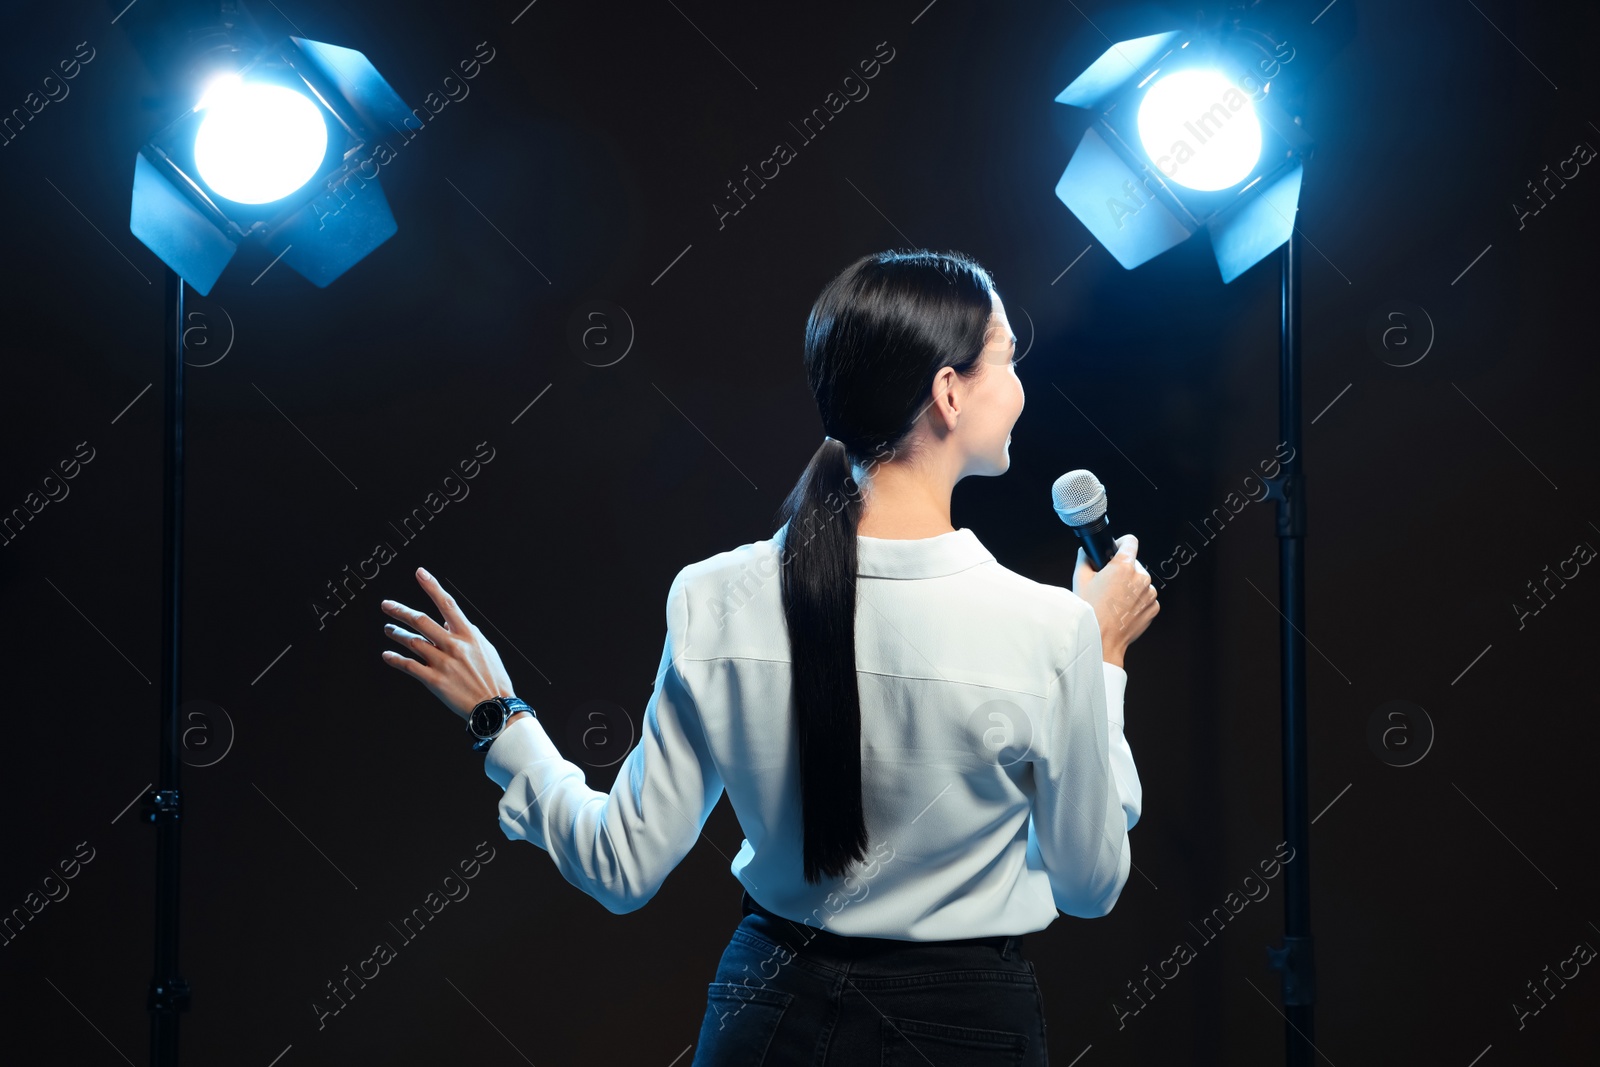 Photo of Motivational speaker with microphone performing on stage, back view